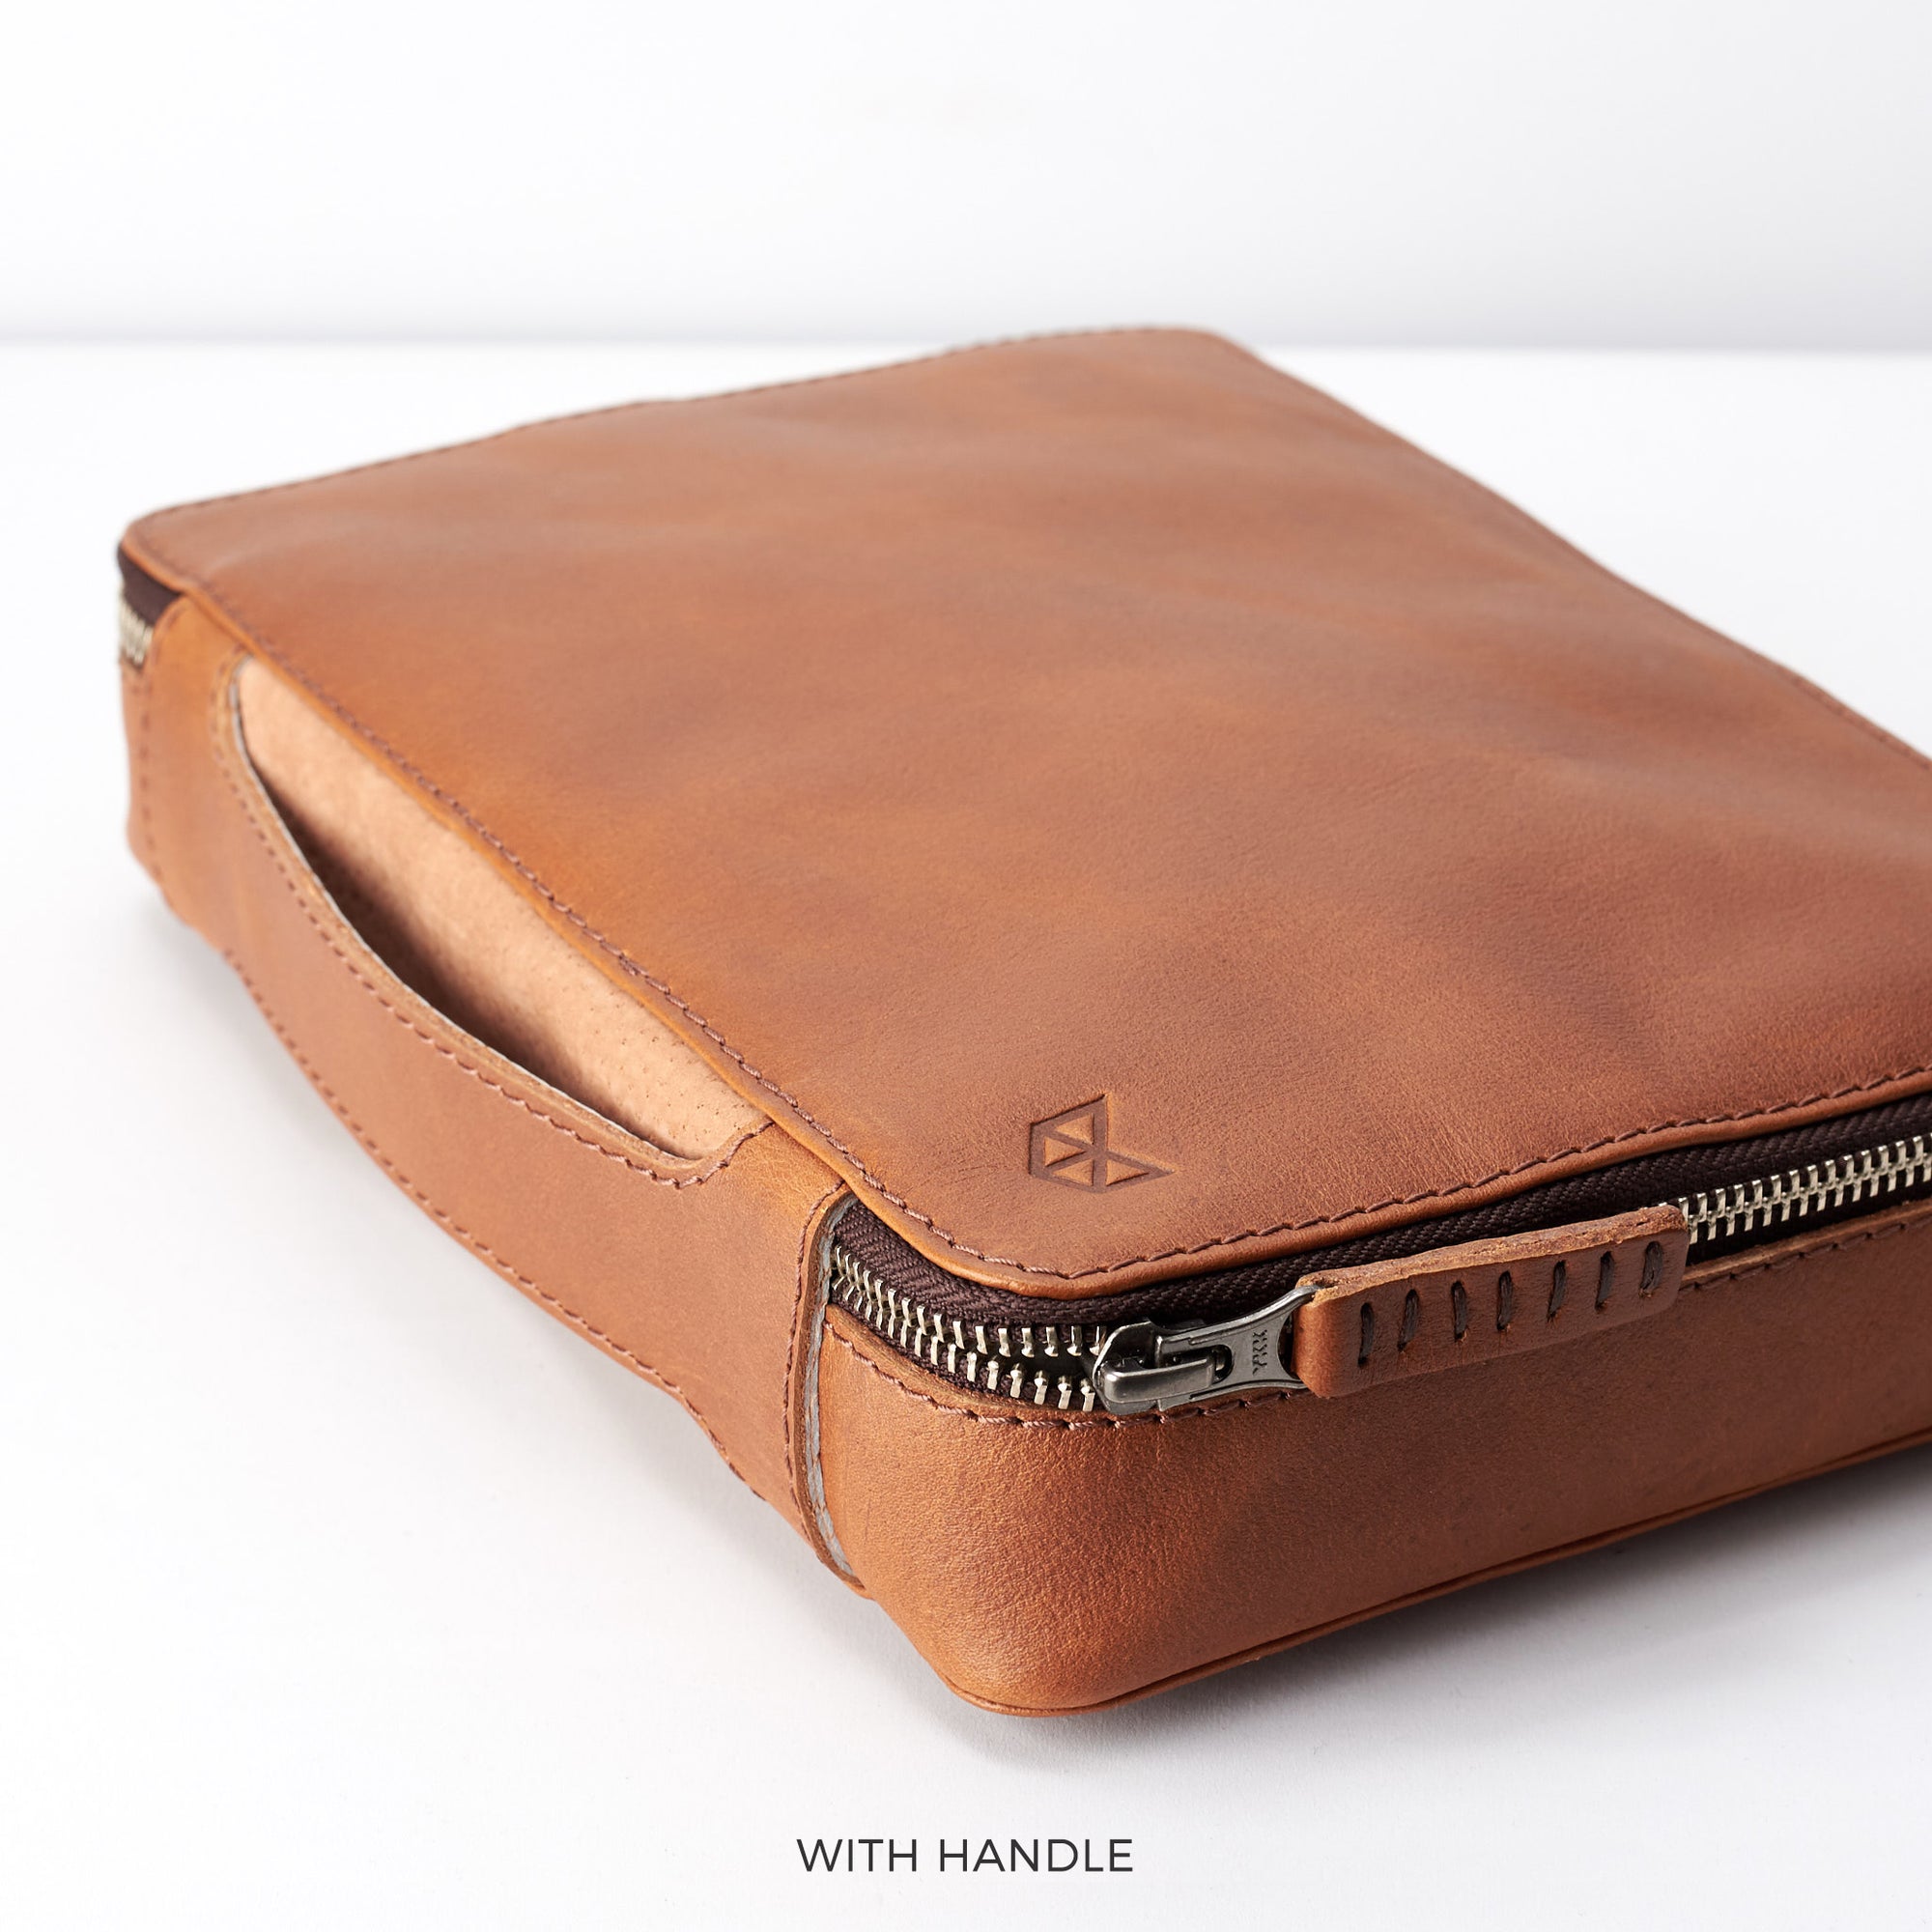 Leather handle. Tech bags for men tan by Capra Leather. Small EDC bags